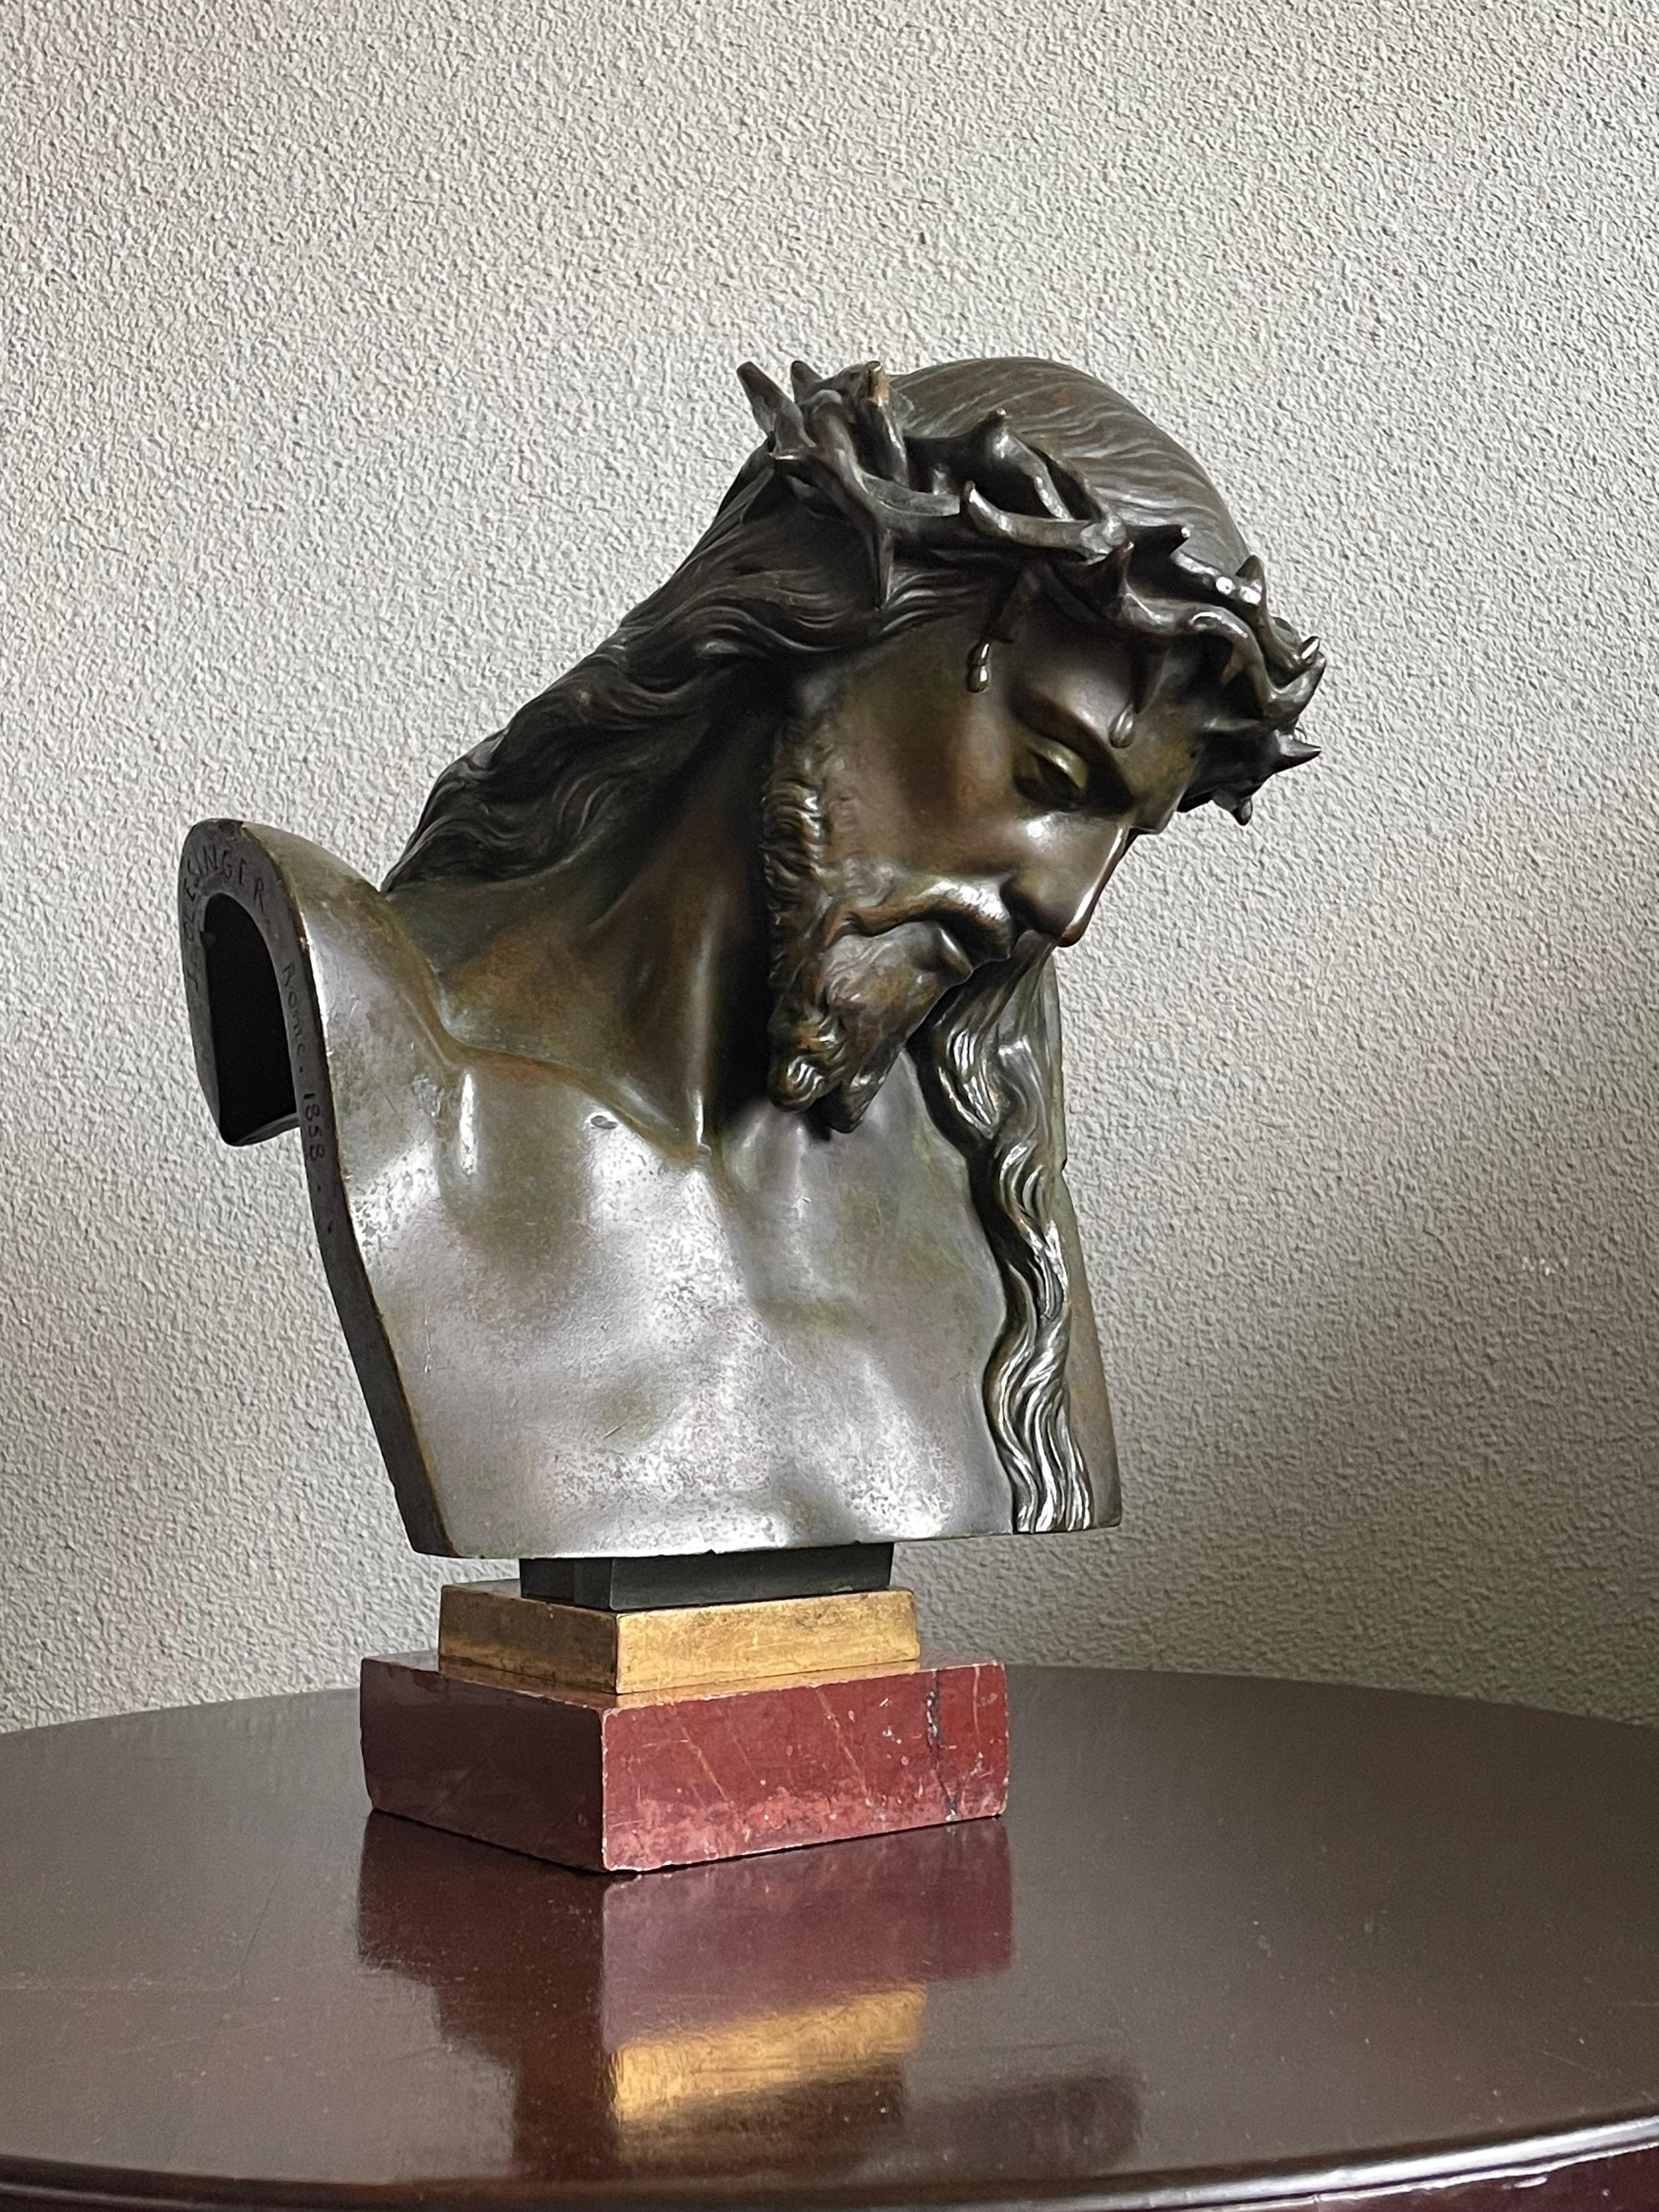 Rare size, antique and signed bronze bust of Jesus Christ with great patina.
 
This striking bronze sculpture by French sculptor Jean-Baptiste Auguste Clésinger (1814-1883) comes in two sizes and this particular bust, although relatively modest in